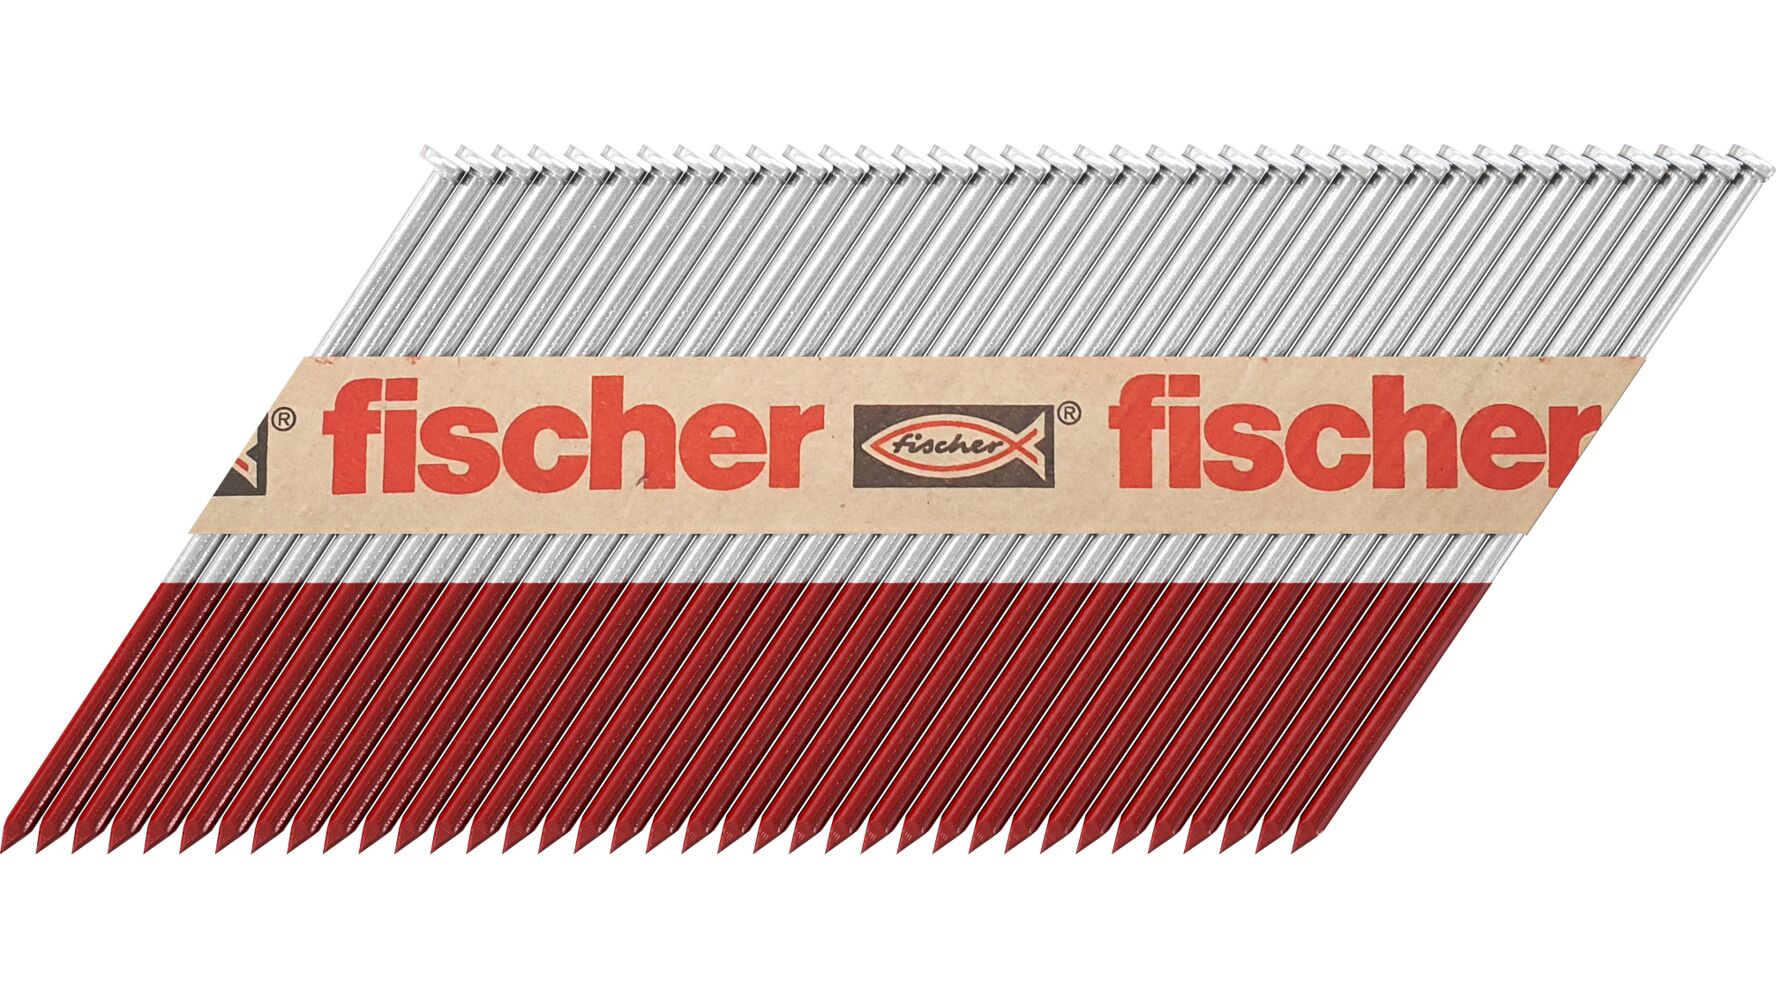 Fischer Collated Nails Smooth Shank FF NP - Galvanised - No Fuel Cell